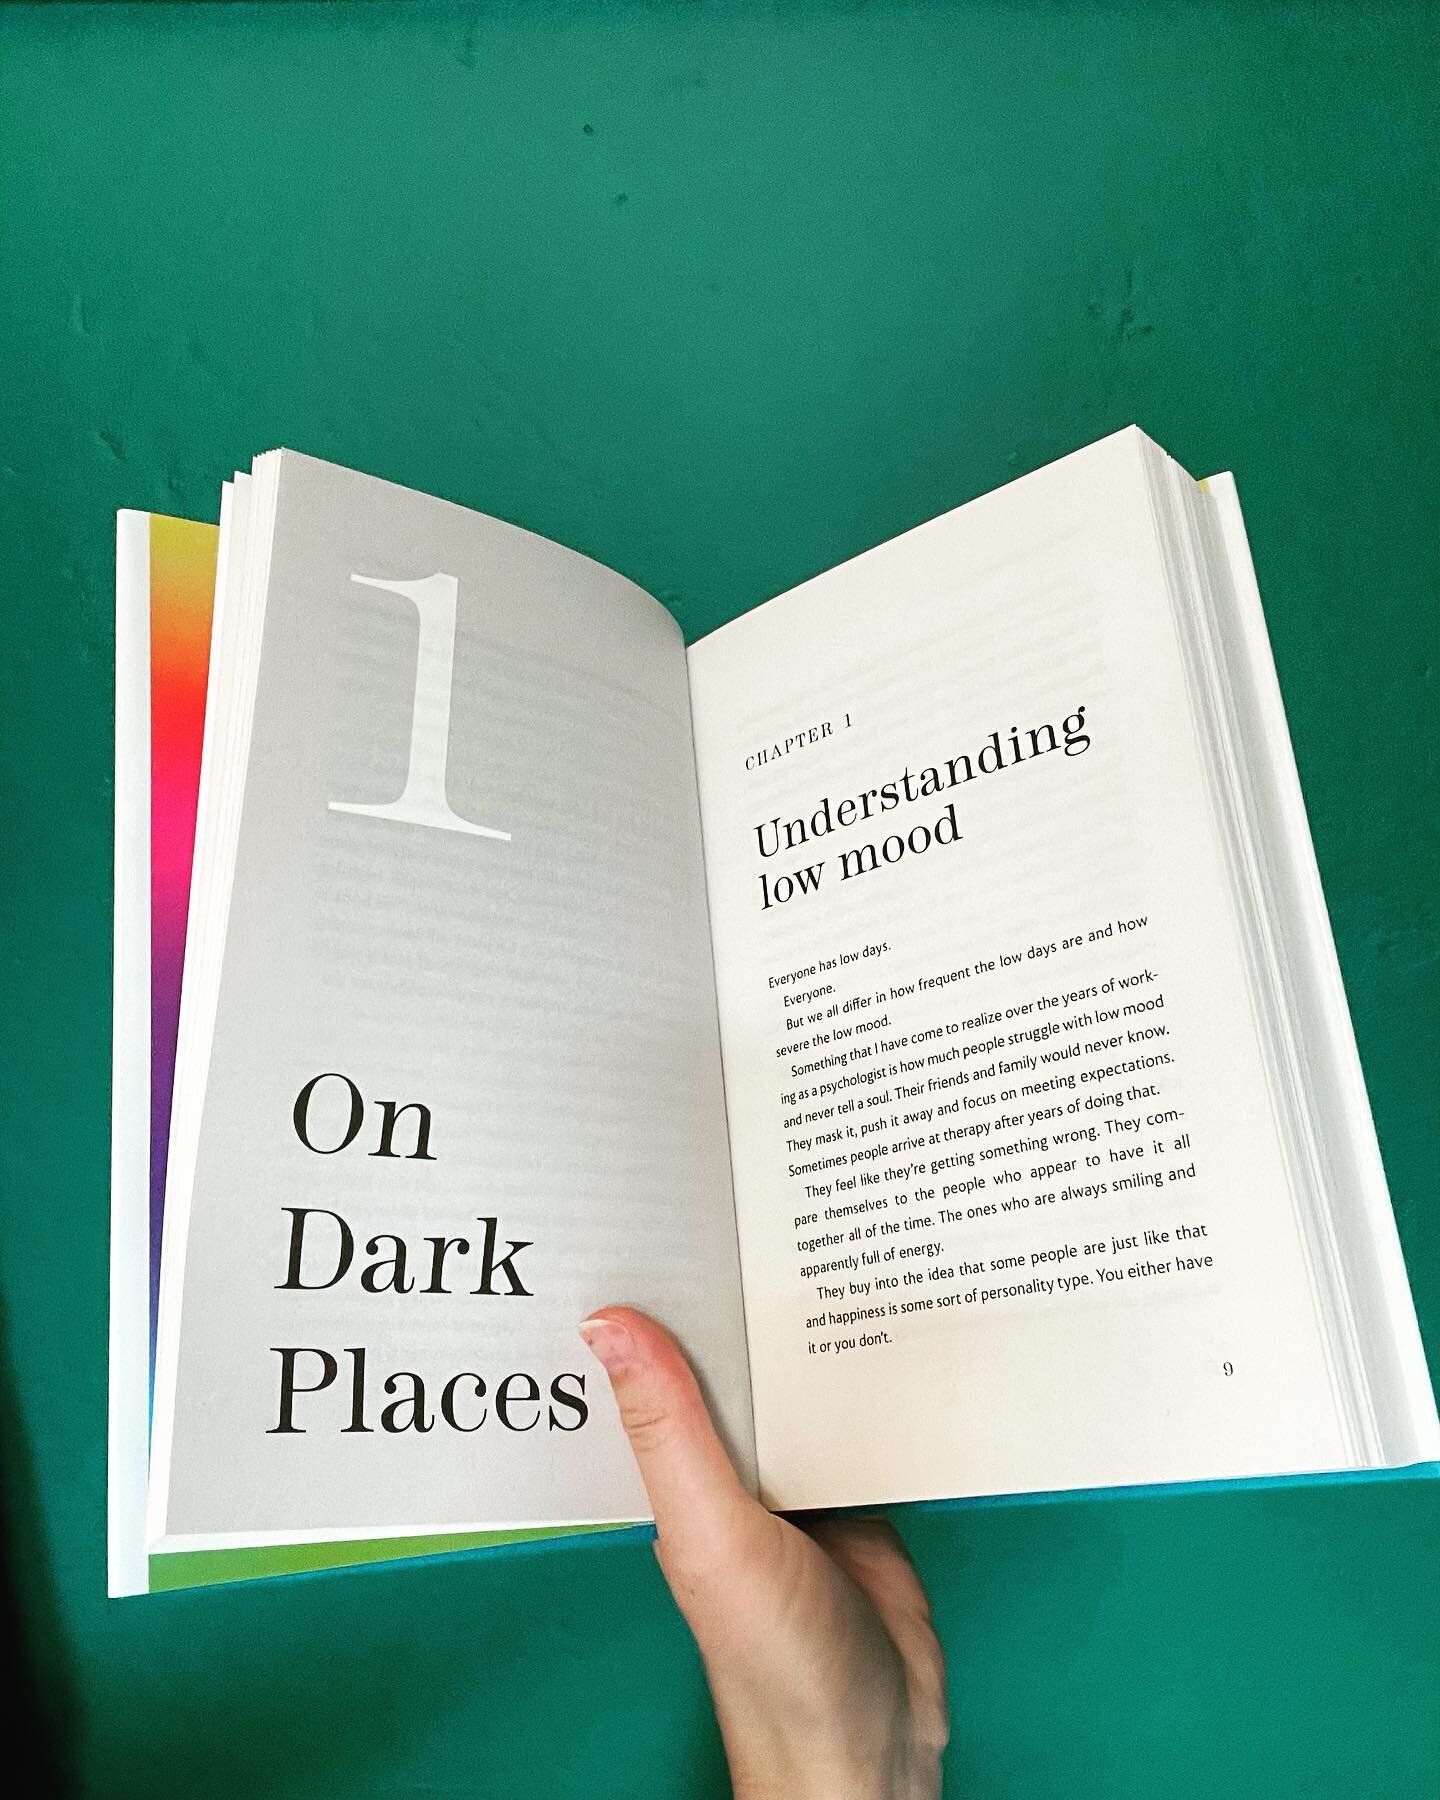 We have a saying in our family about the Well Of Despair. When you are bummed out, having a hard time or as this book describes - in a &lsquo;dark place&rsquo;, we would say to each other: I&rsquo;m in the Well today. 

It was an easier way to say: I